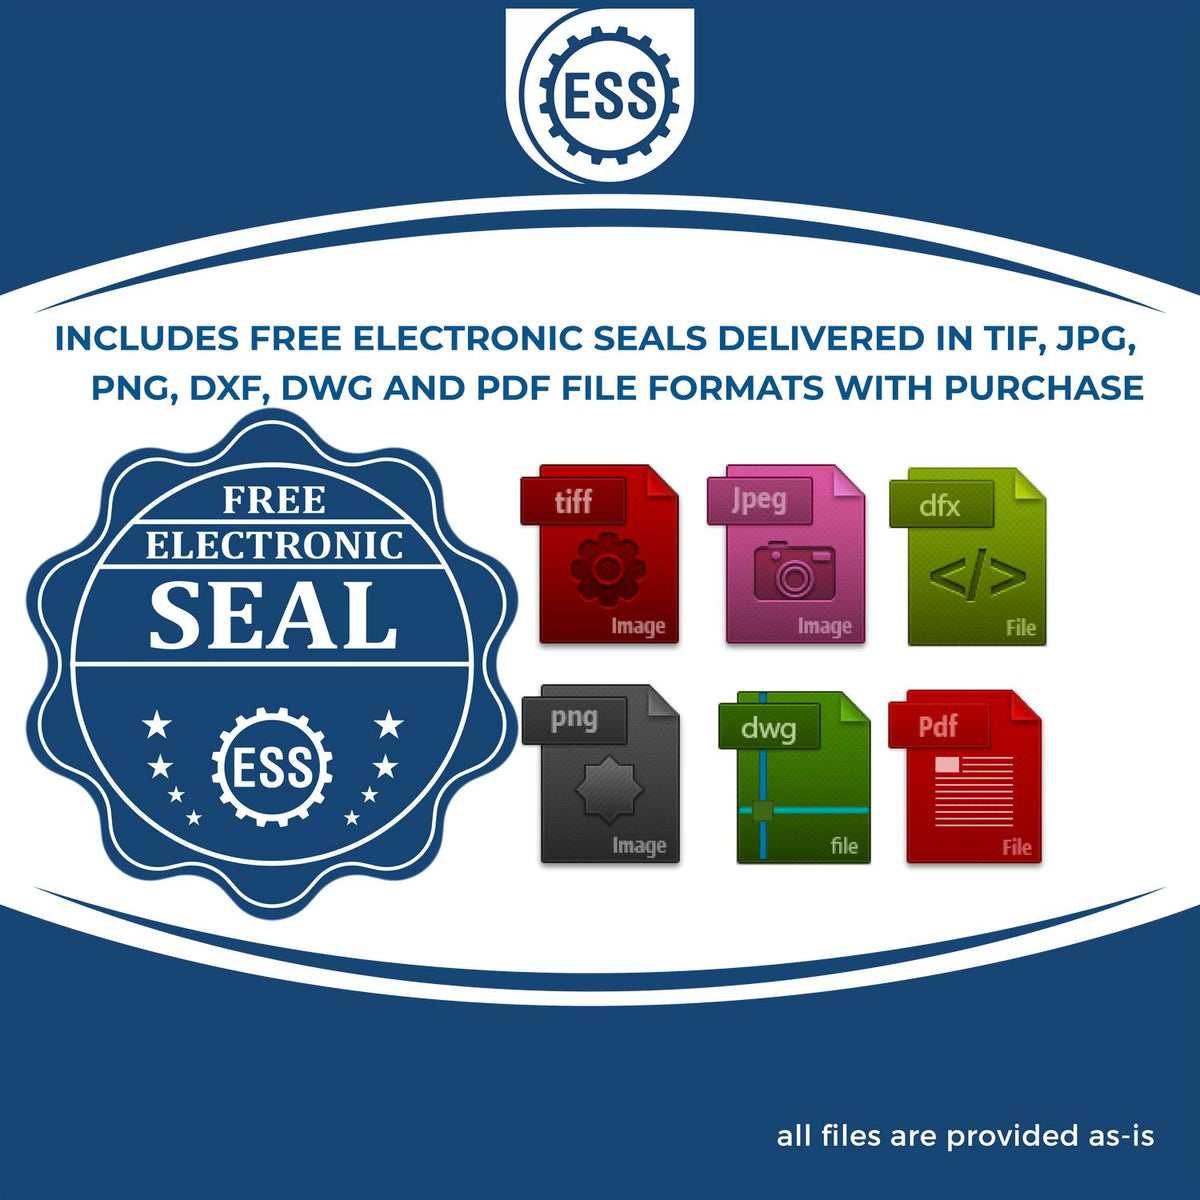 An infographic for the free electronic seal for the Slim Pre-Inked New Hampshire Land Surveyor Seal Stamp illustrating the different file type icons such as DXF, DWG, TIF, JPG and PNG.